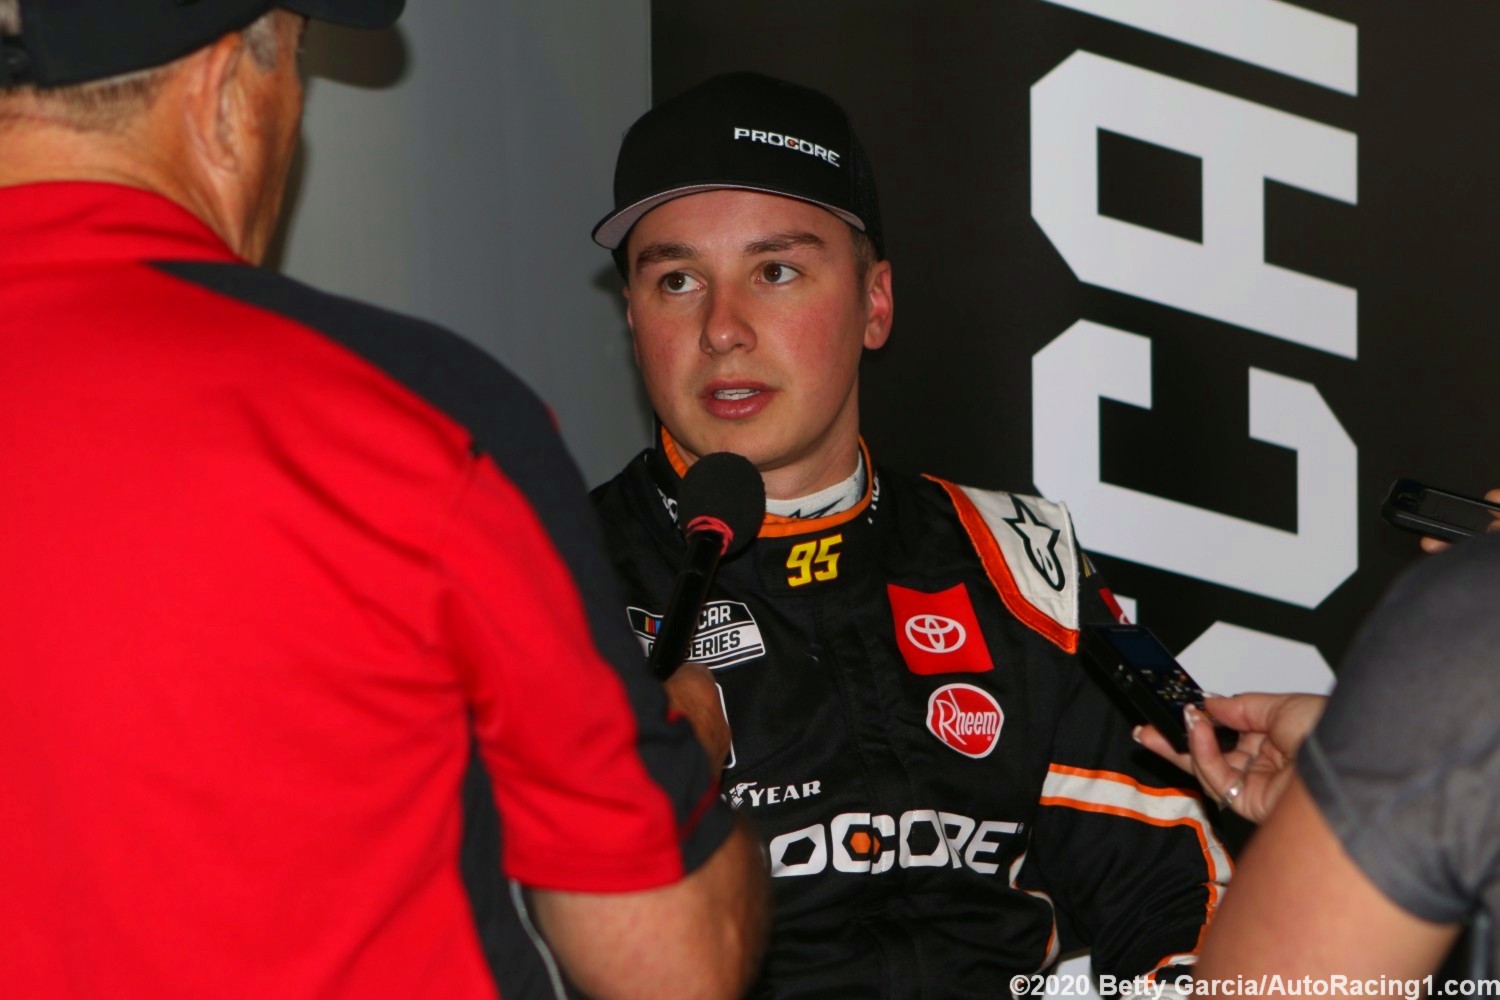 Christopher Bell's team owner calls it quits